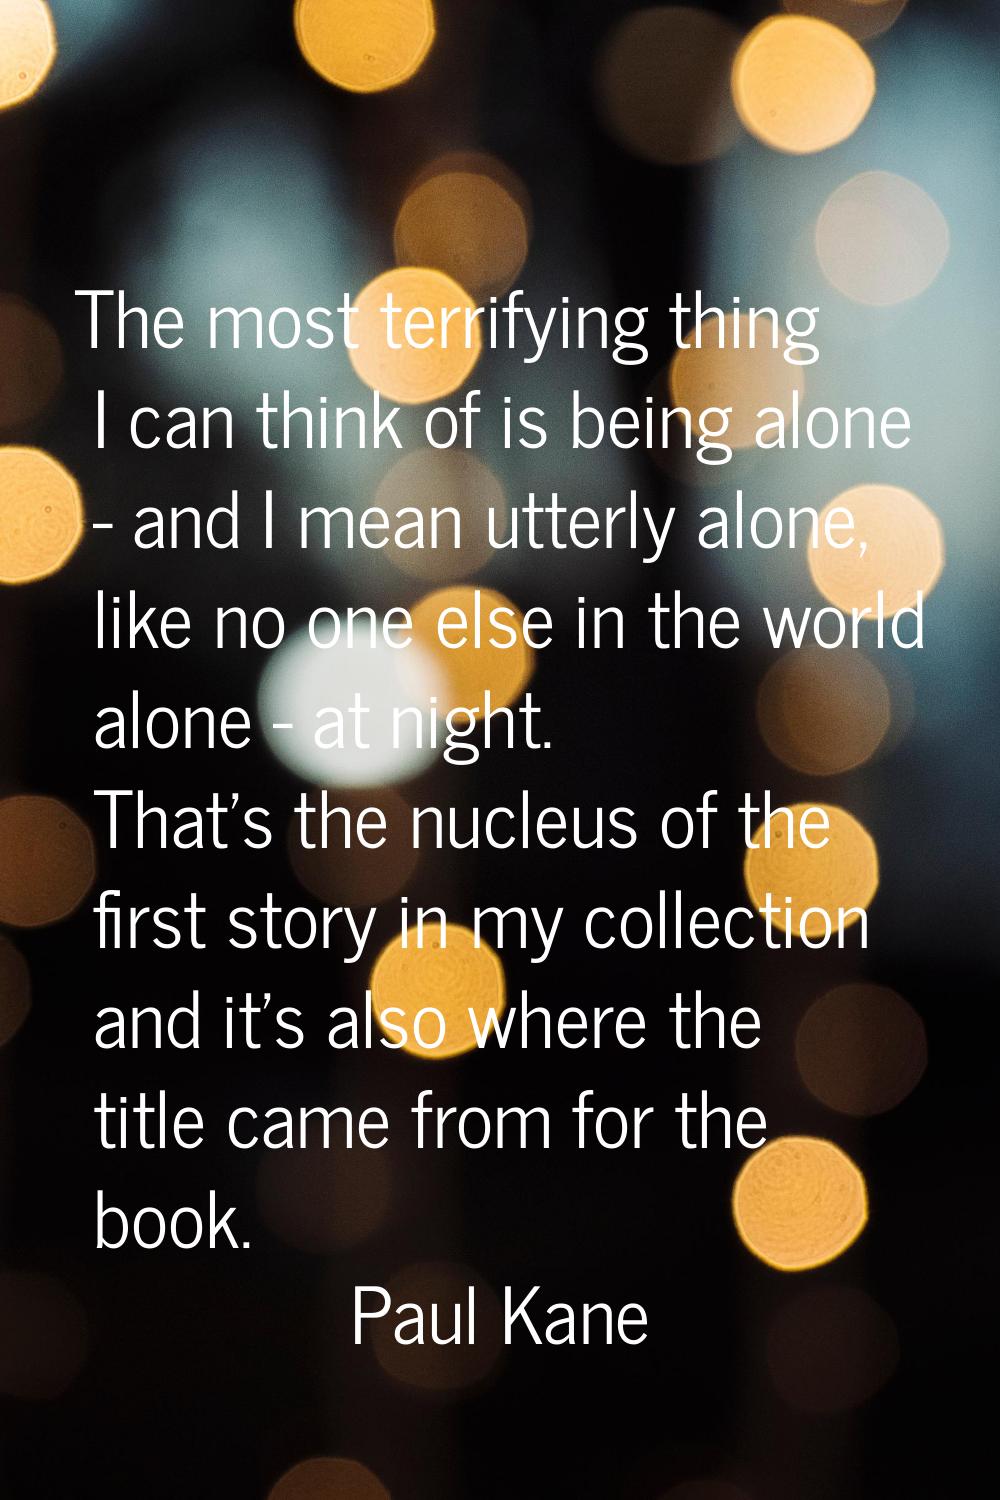 The most terrifying thing I can think of is being alone - and I mean utterly alone, like no one els